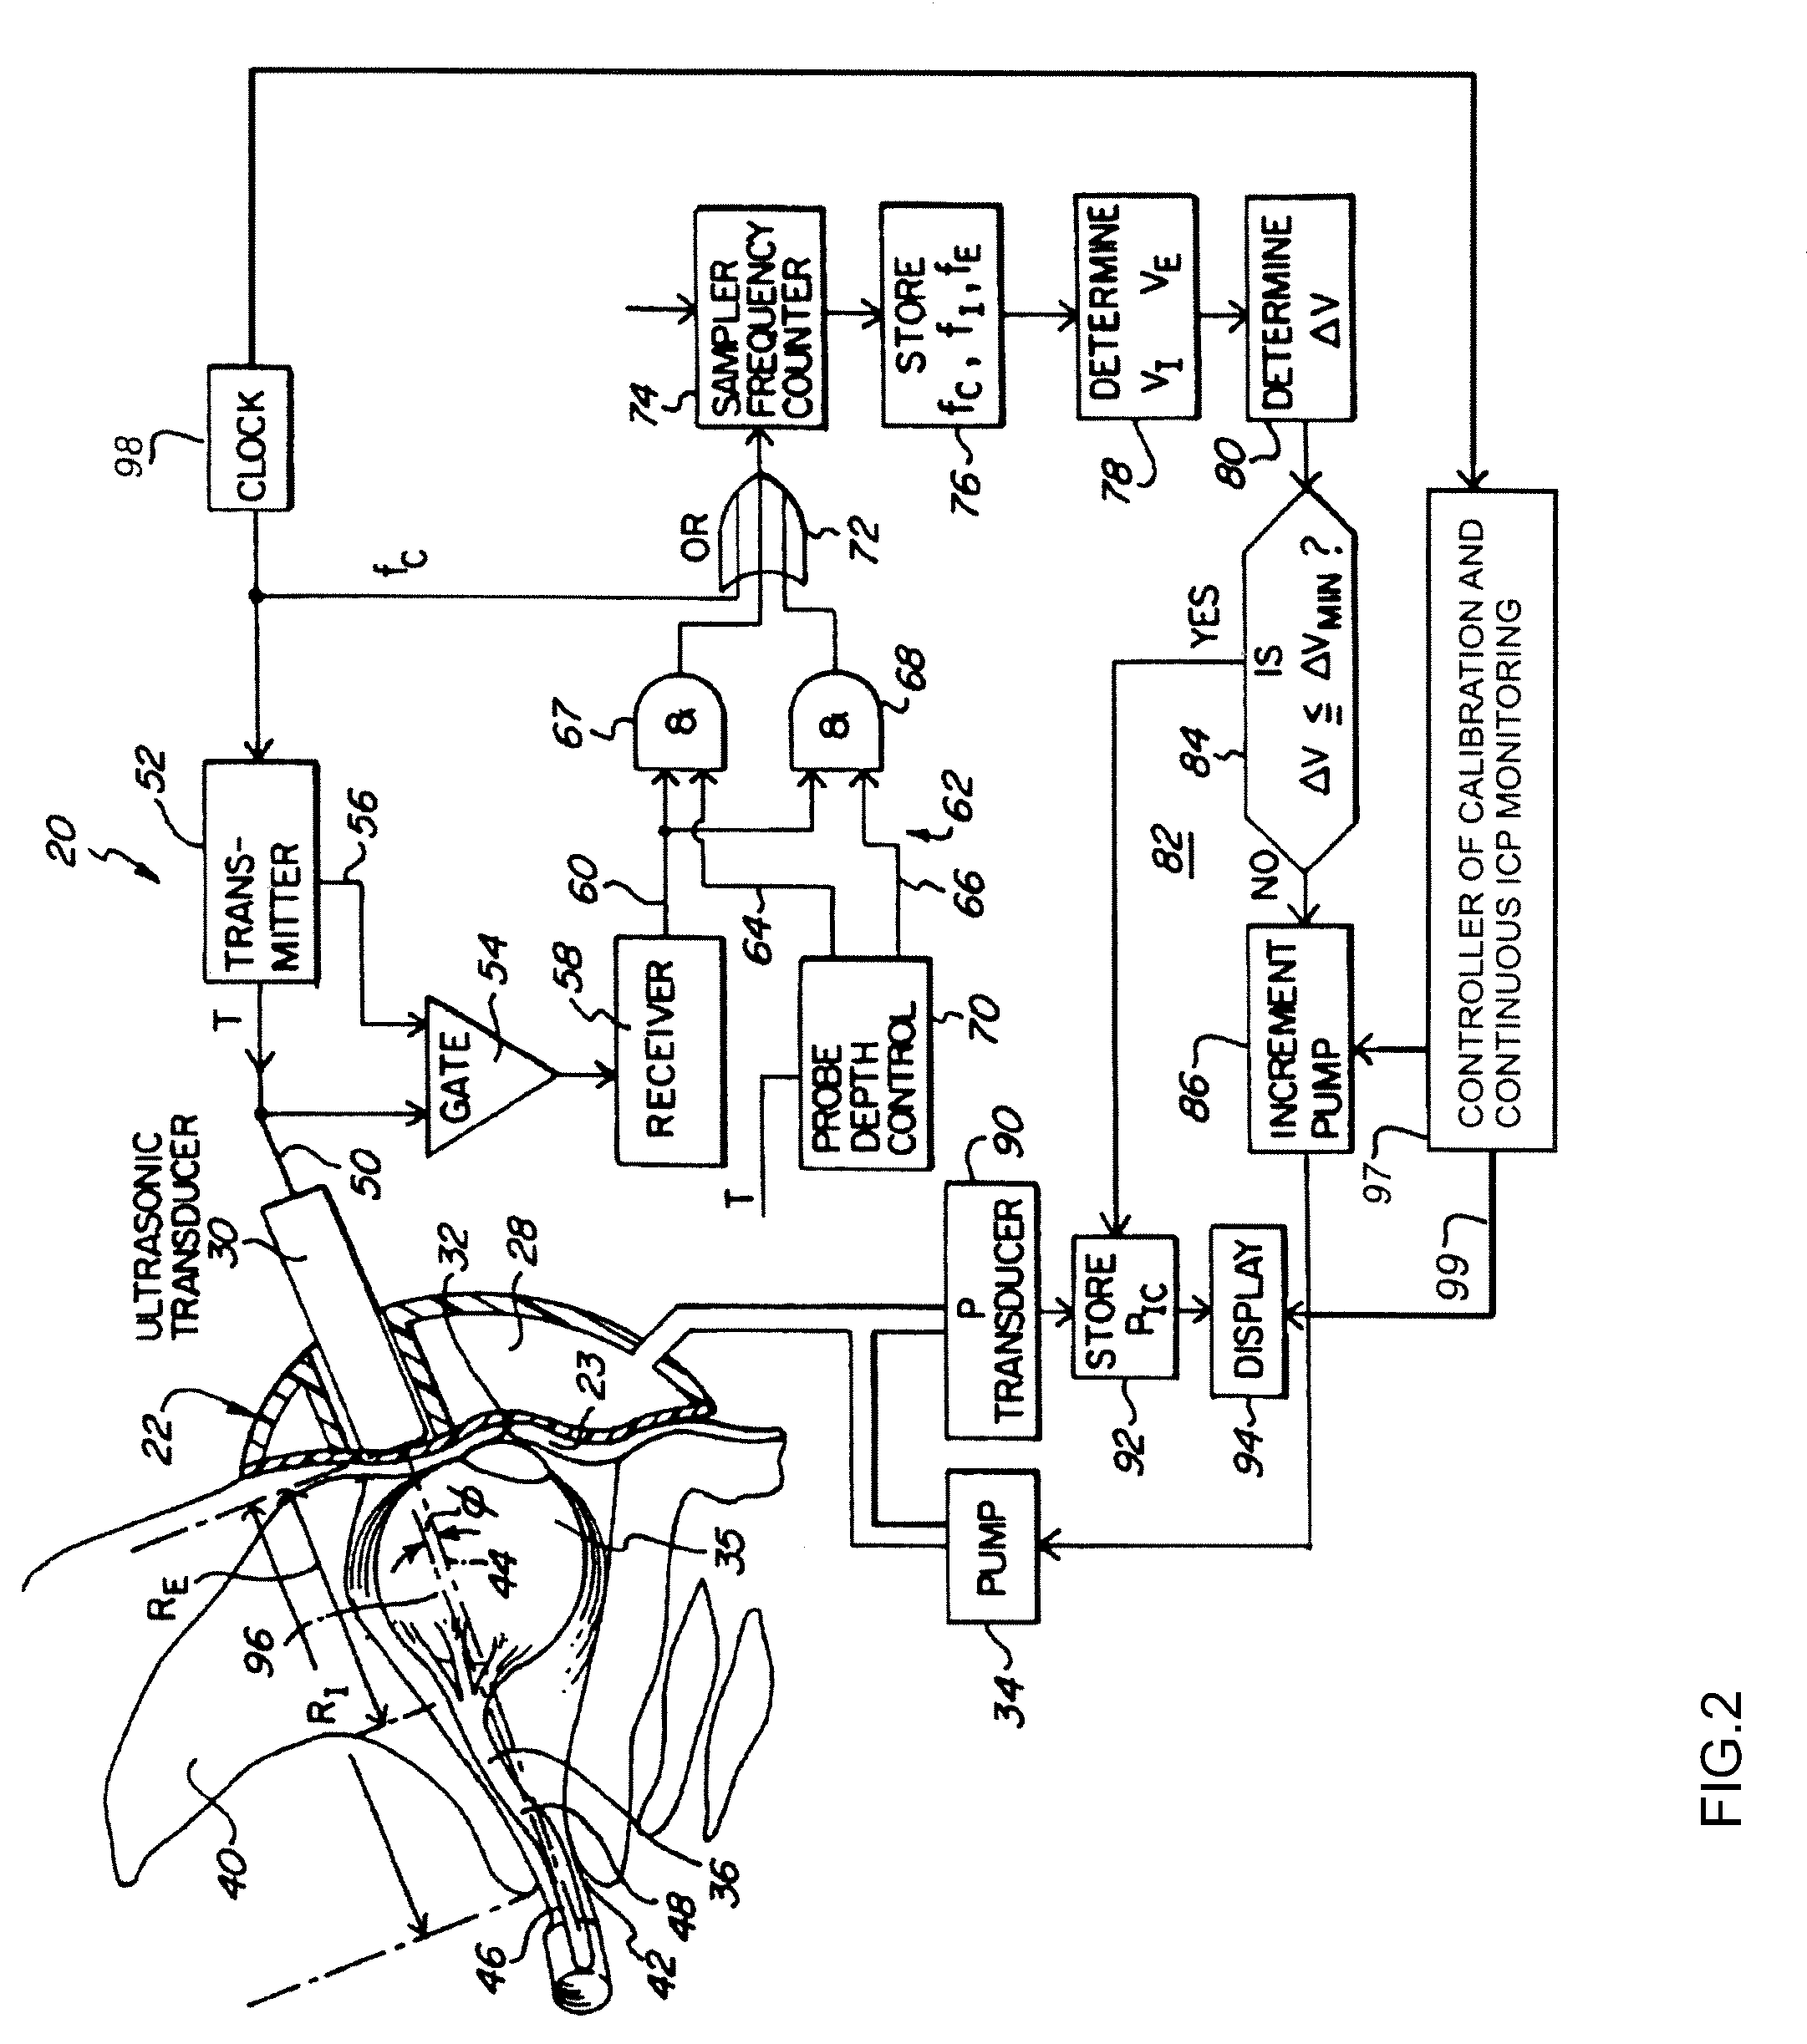 Method and Apparatus for Continuously Monitoring Intracranial Pressure